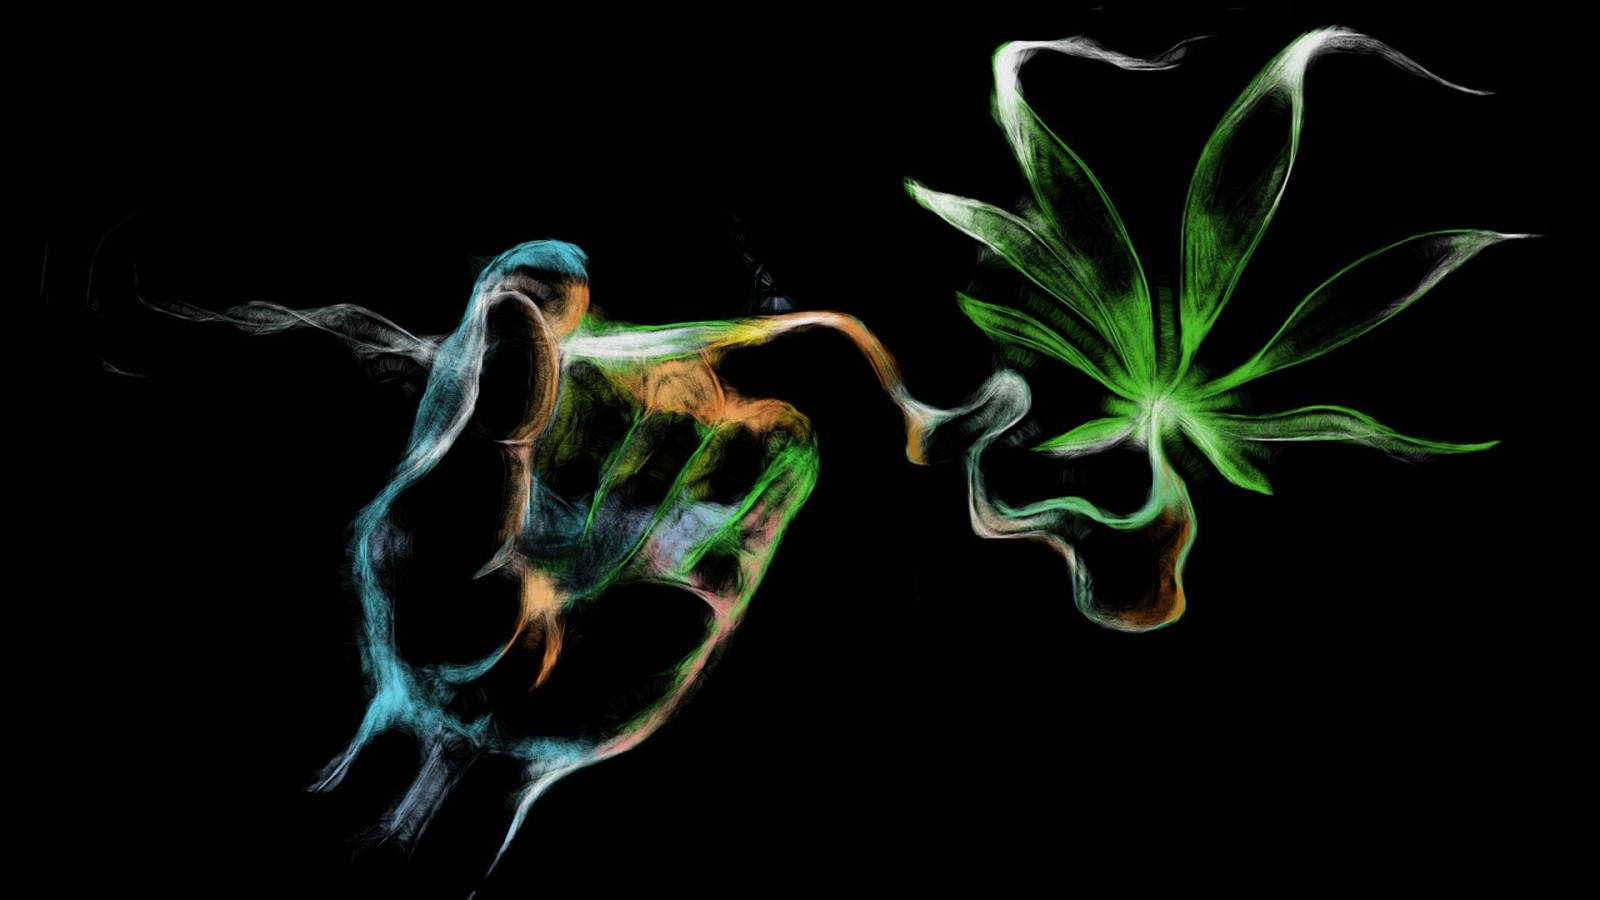 Free Cool Weed Wallpaper Downloads, [100+] Cool Weed Wallpapers for FREE |  